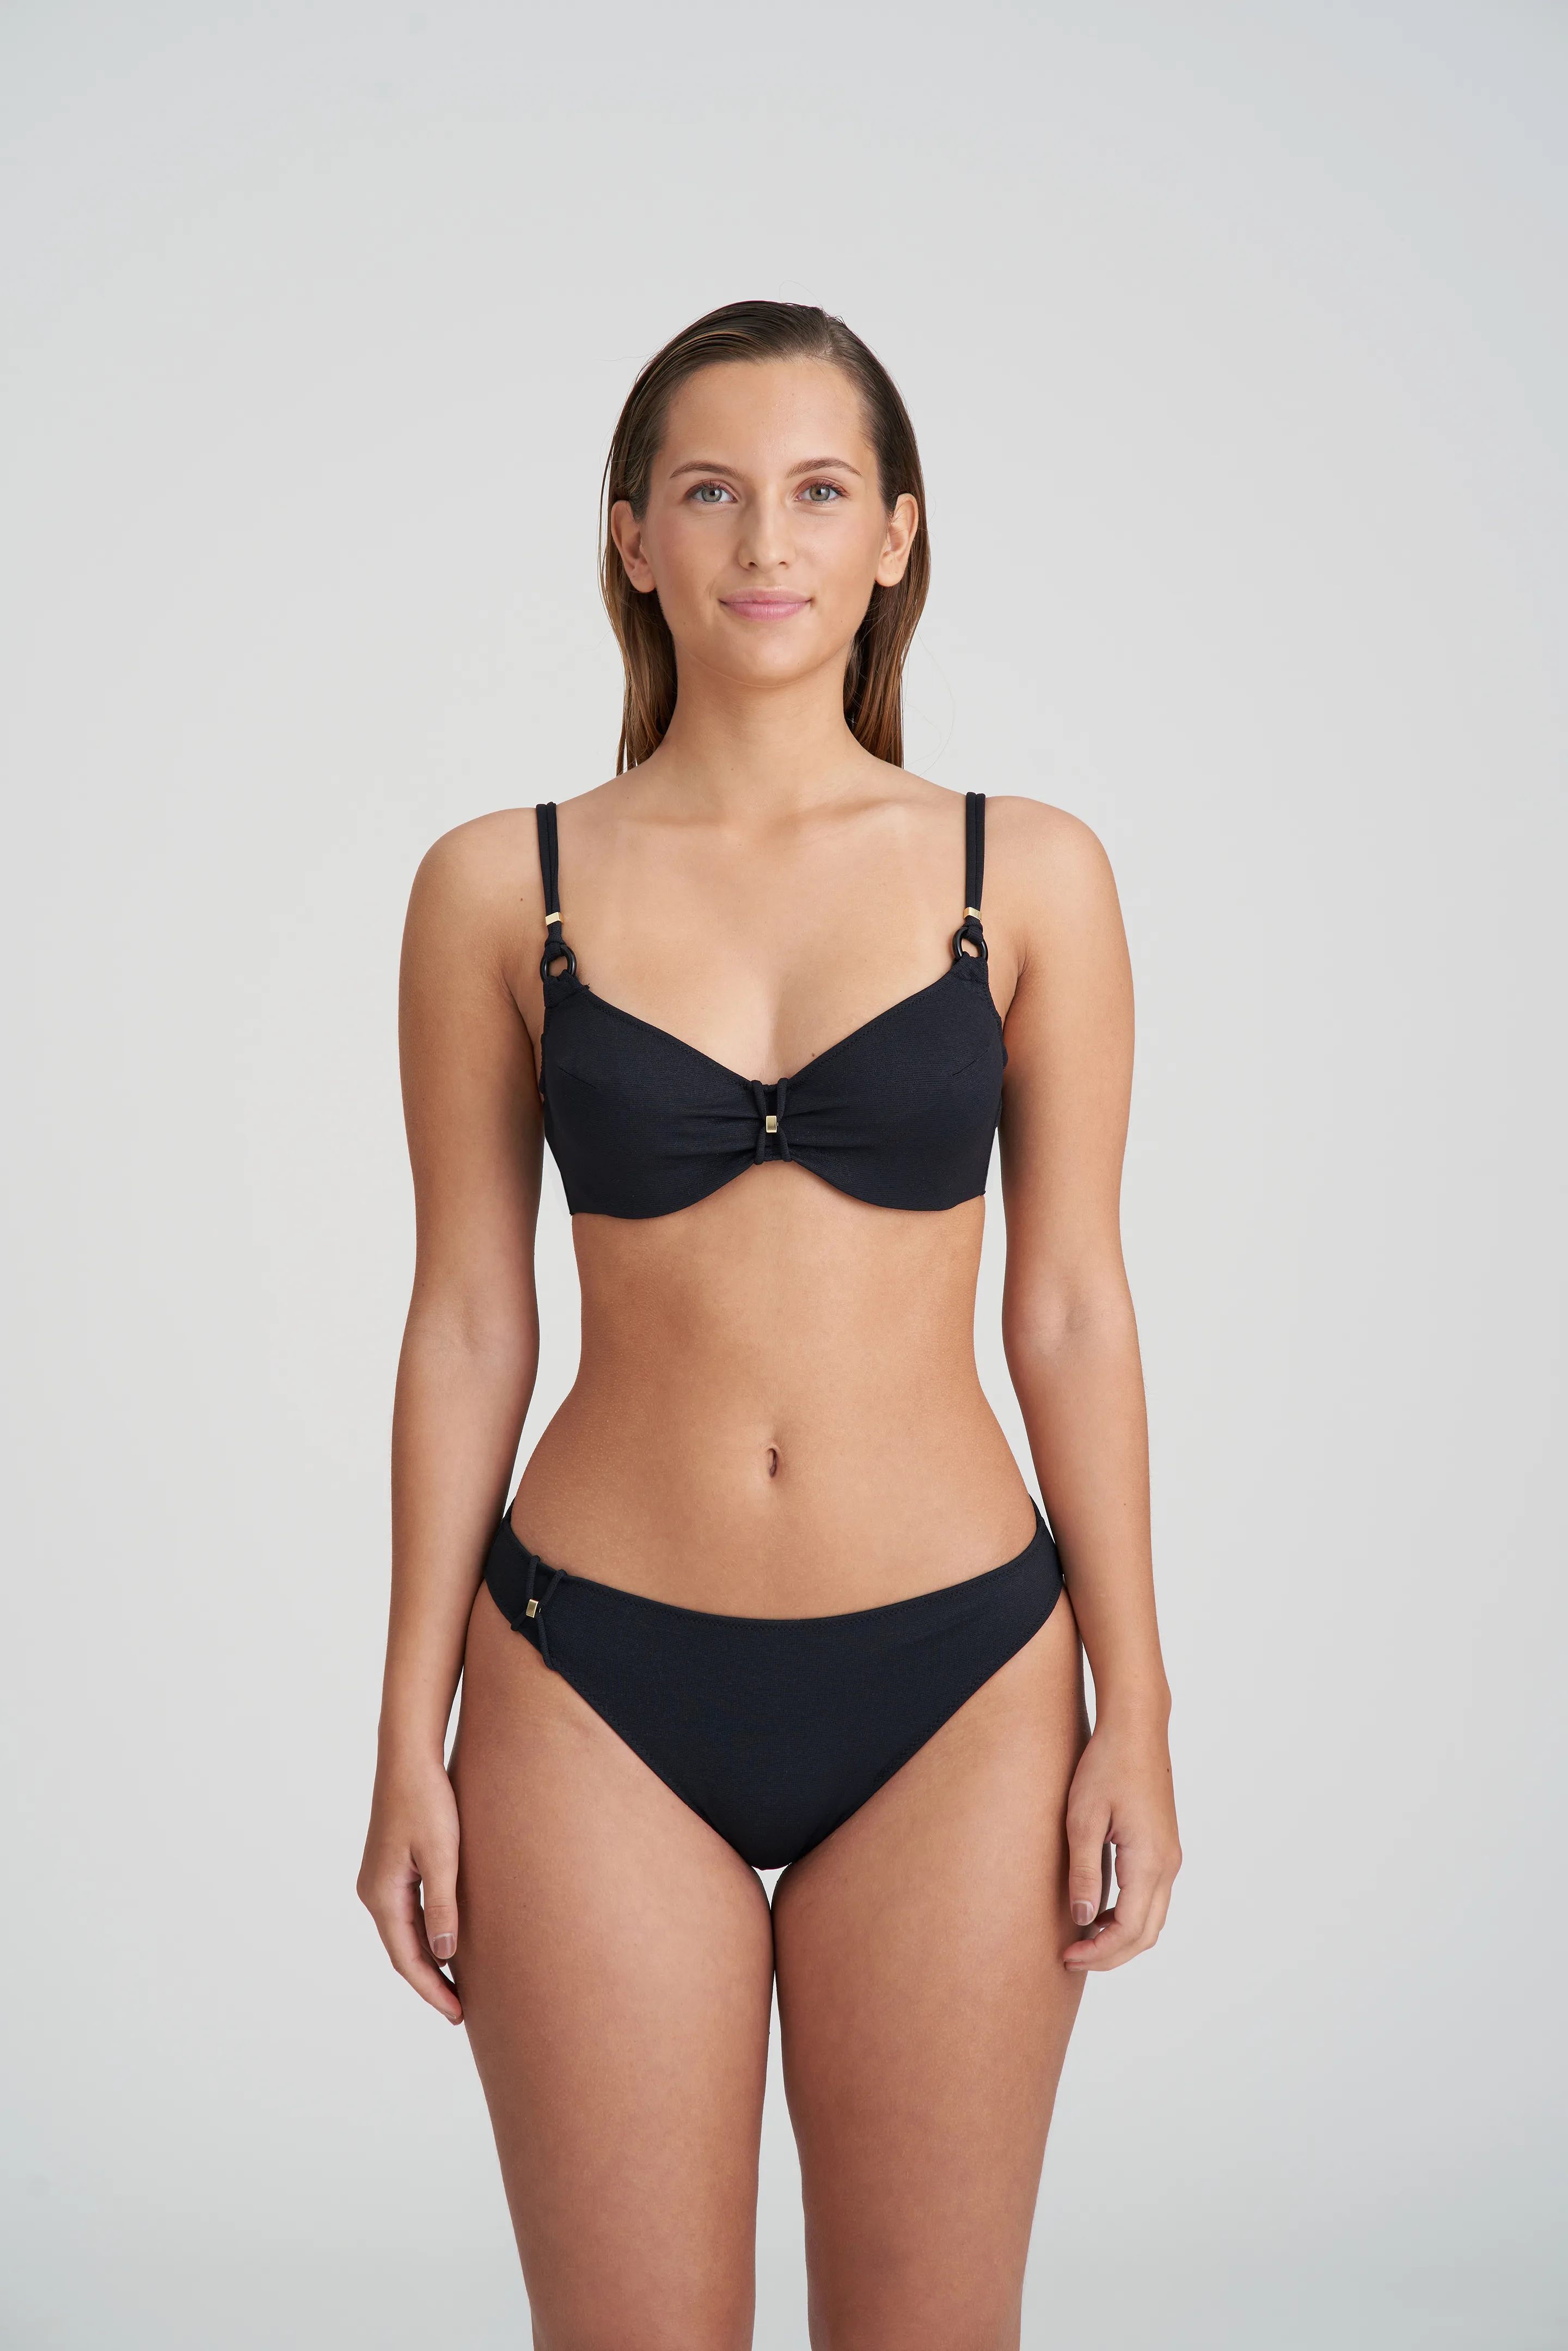 Cleavage-Enhancing Seaside Bikini Top - Perfect lift and support